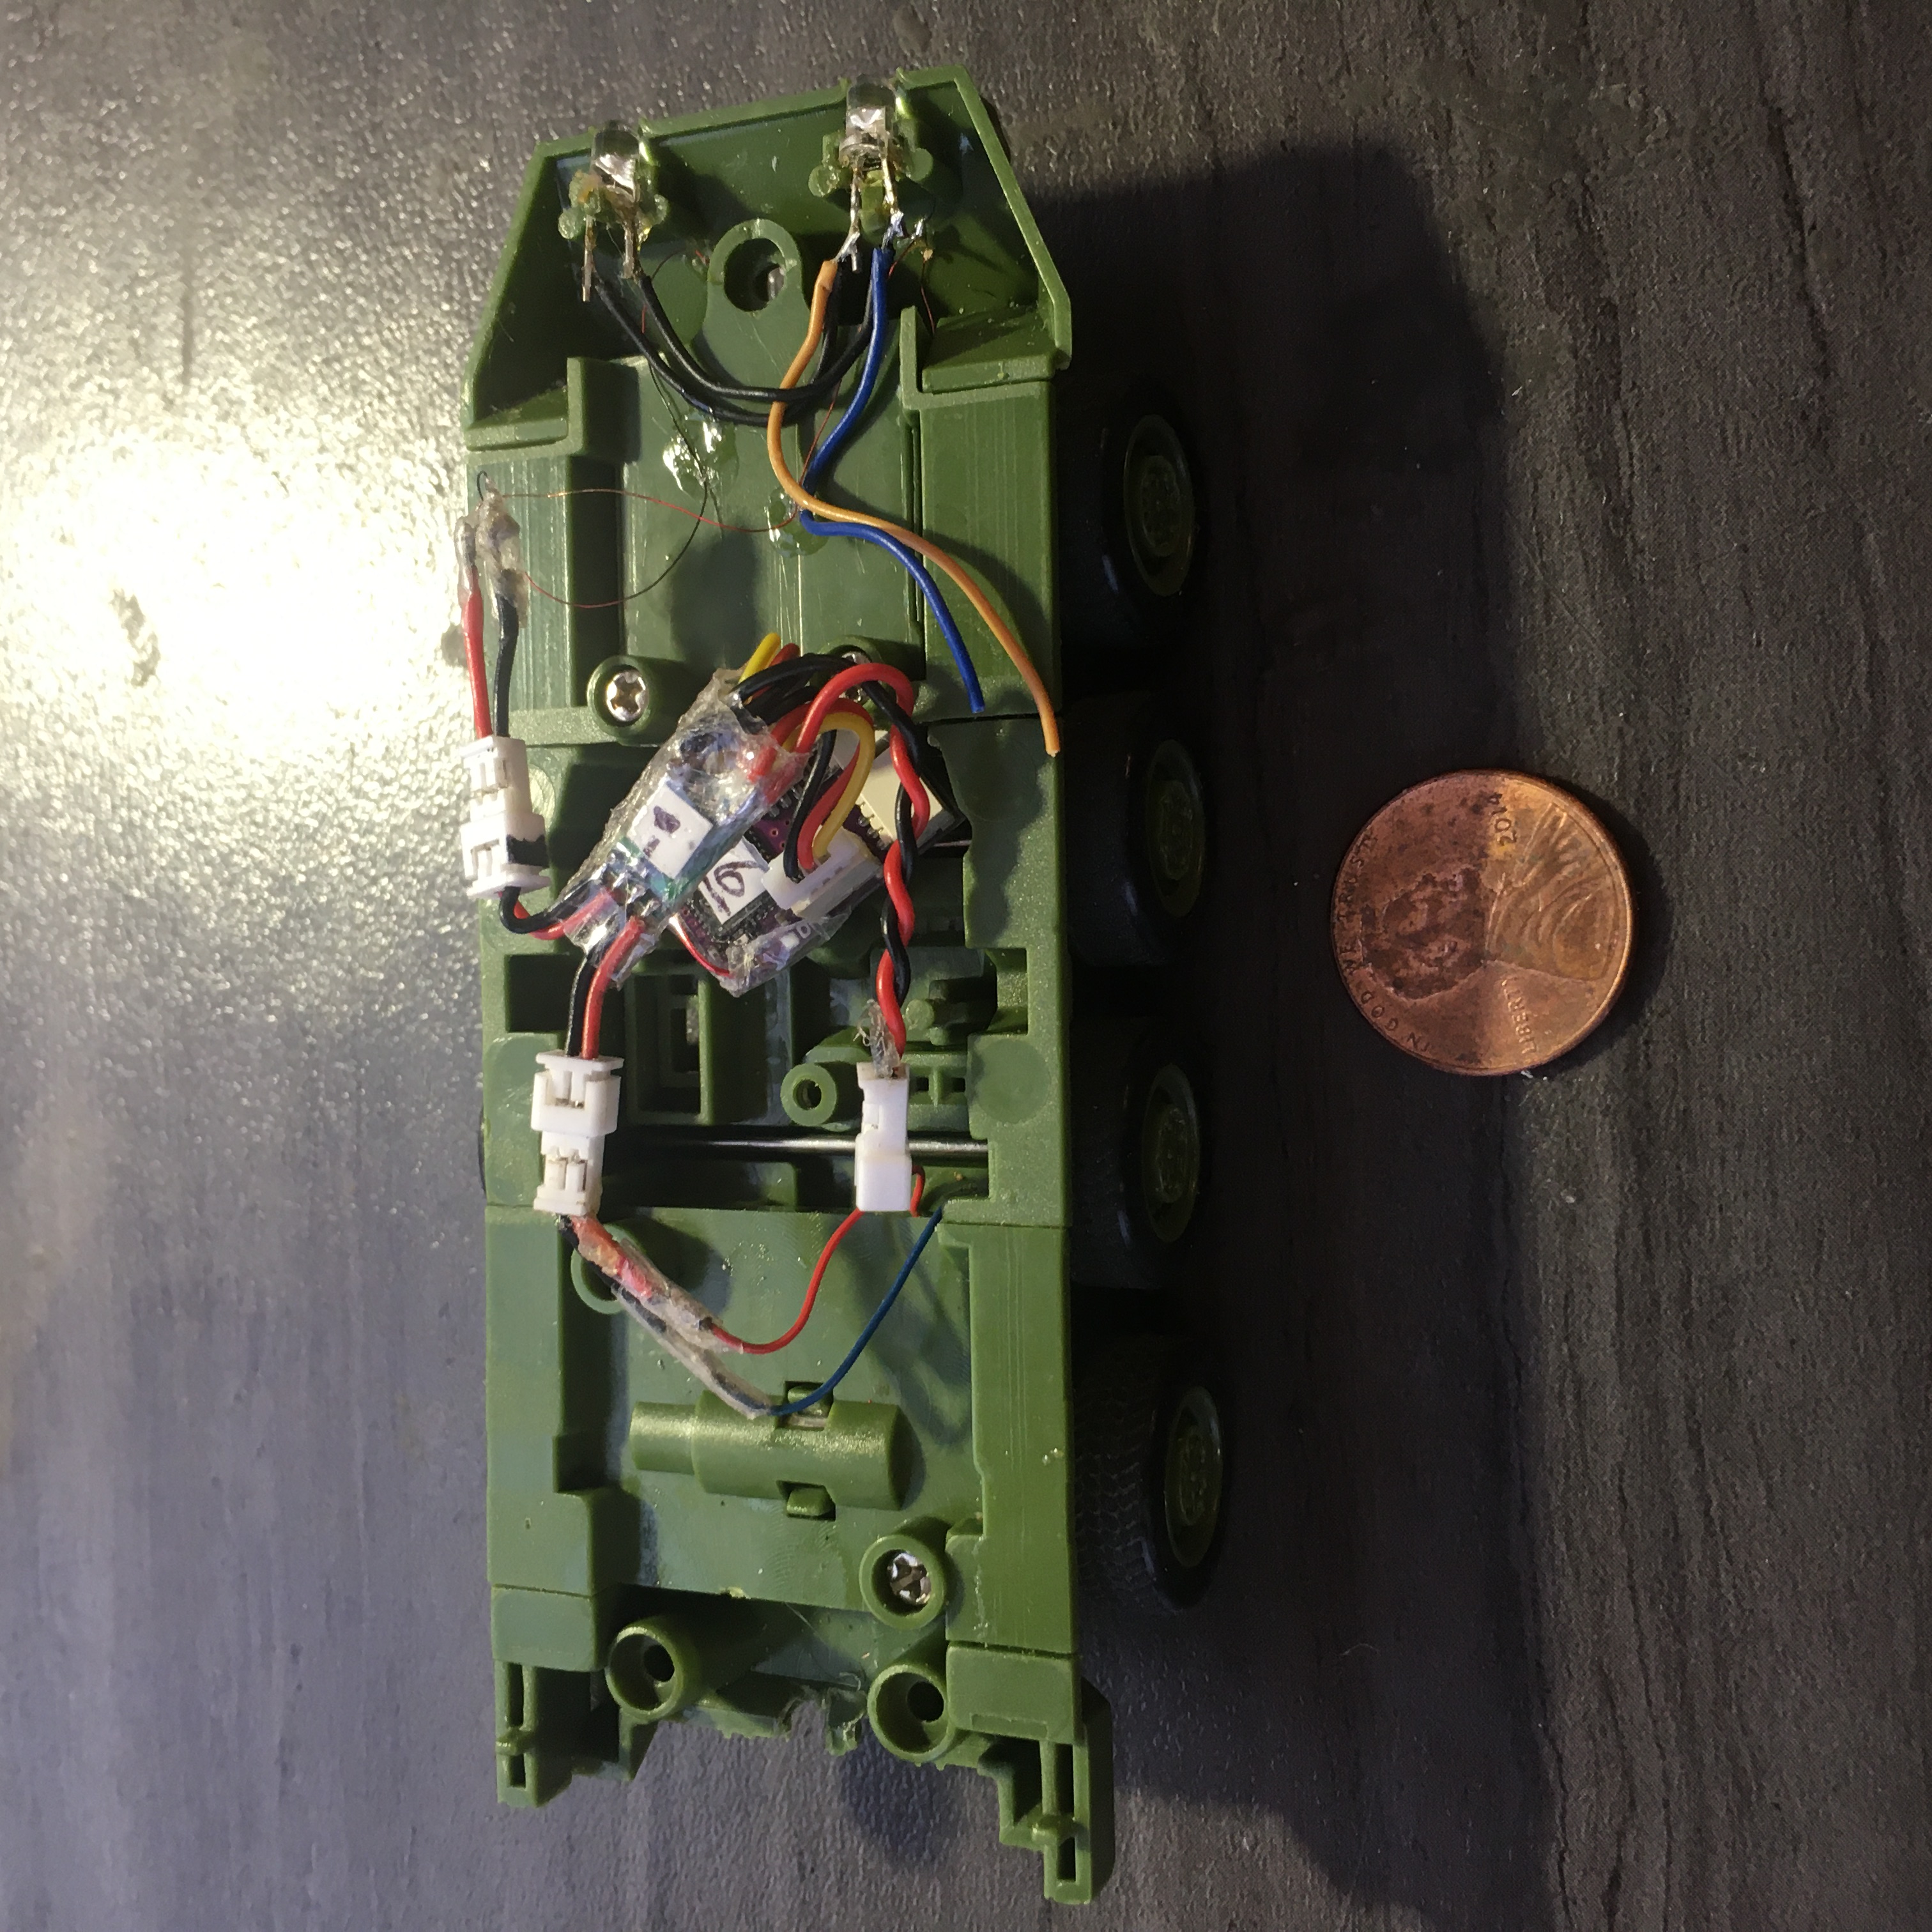 This Stryker is pretty small @ 1:67 scale